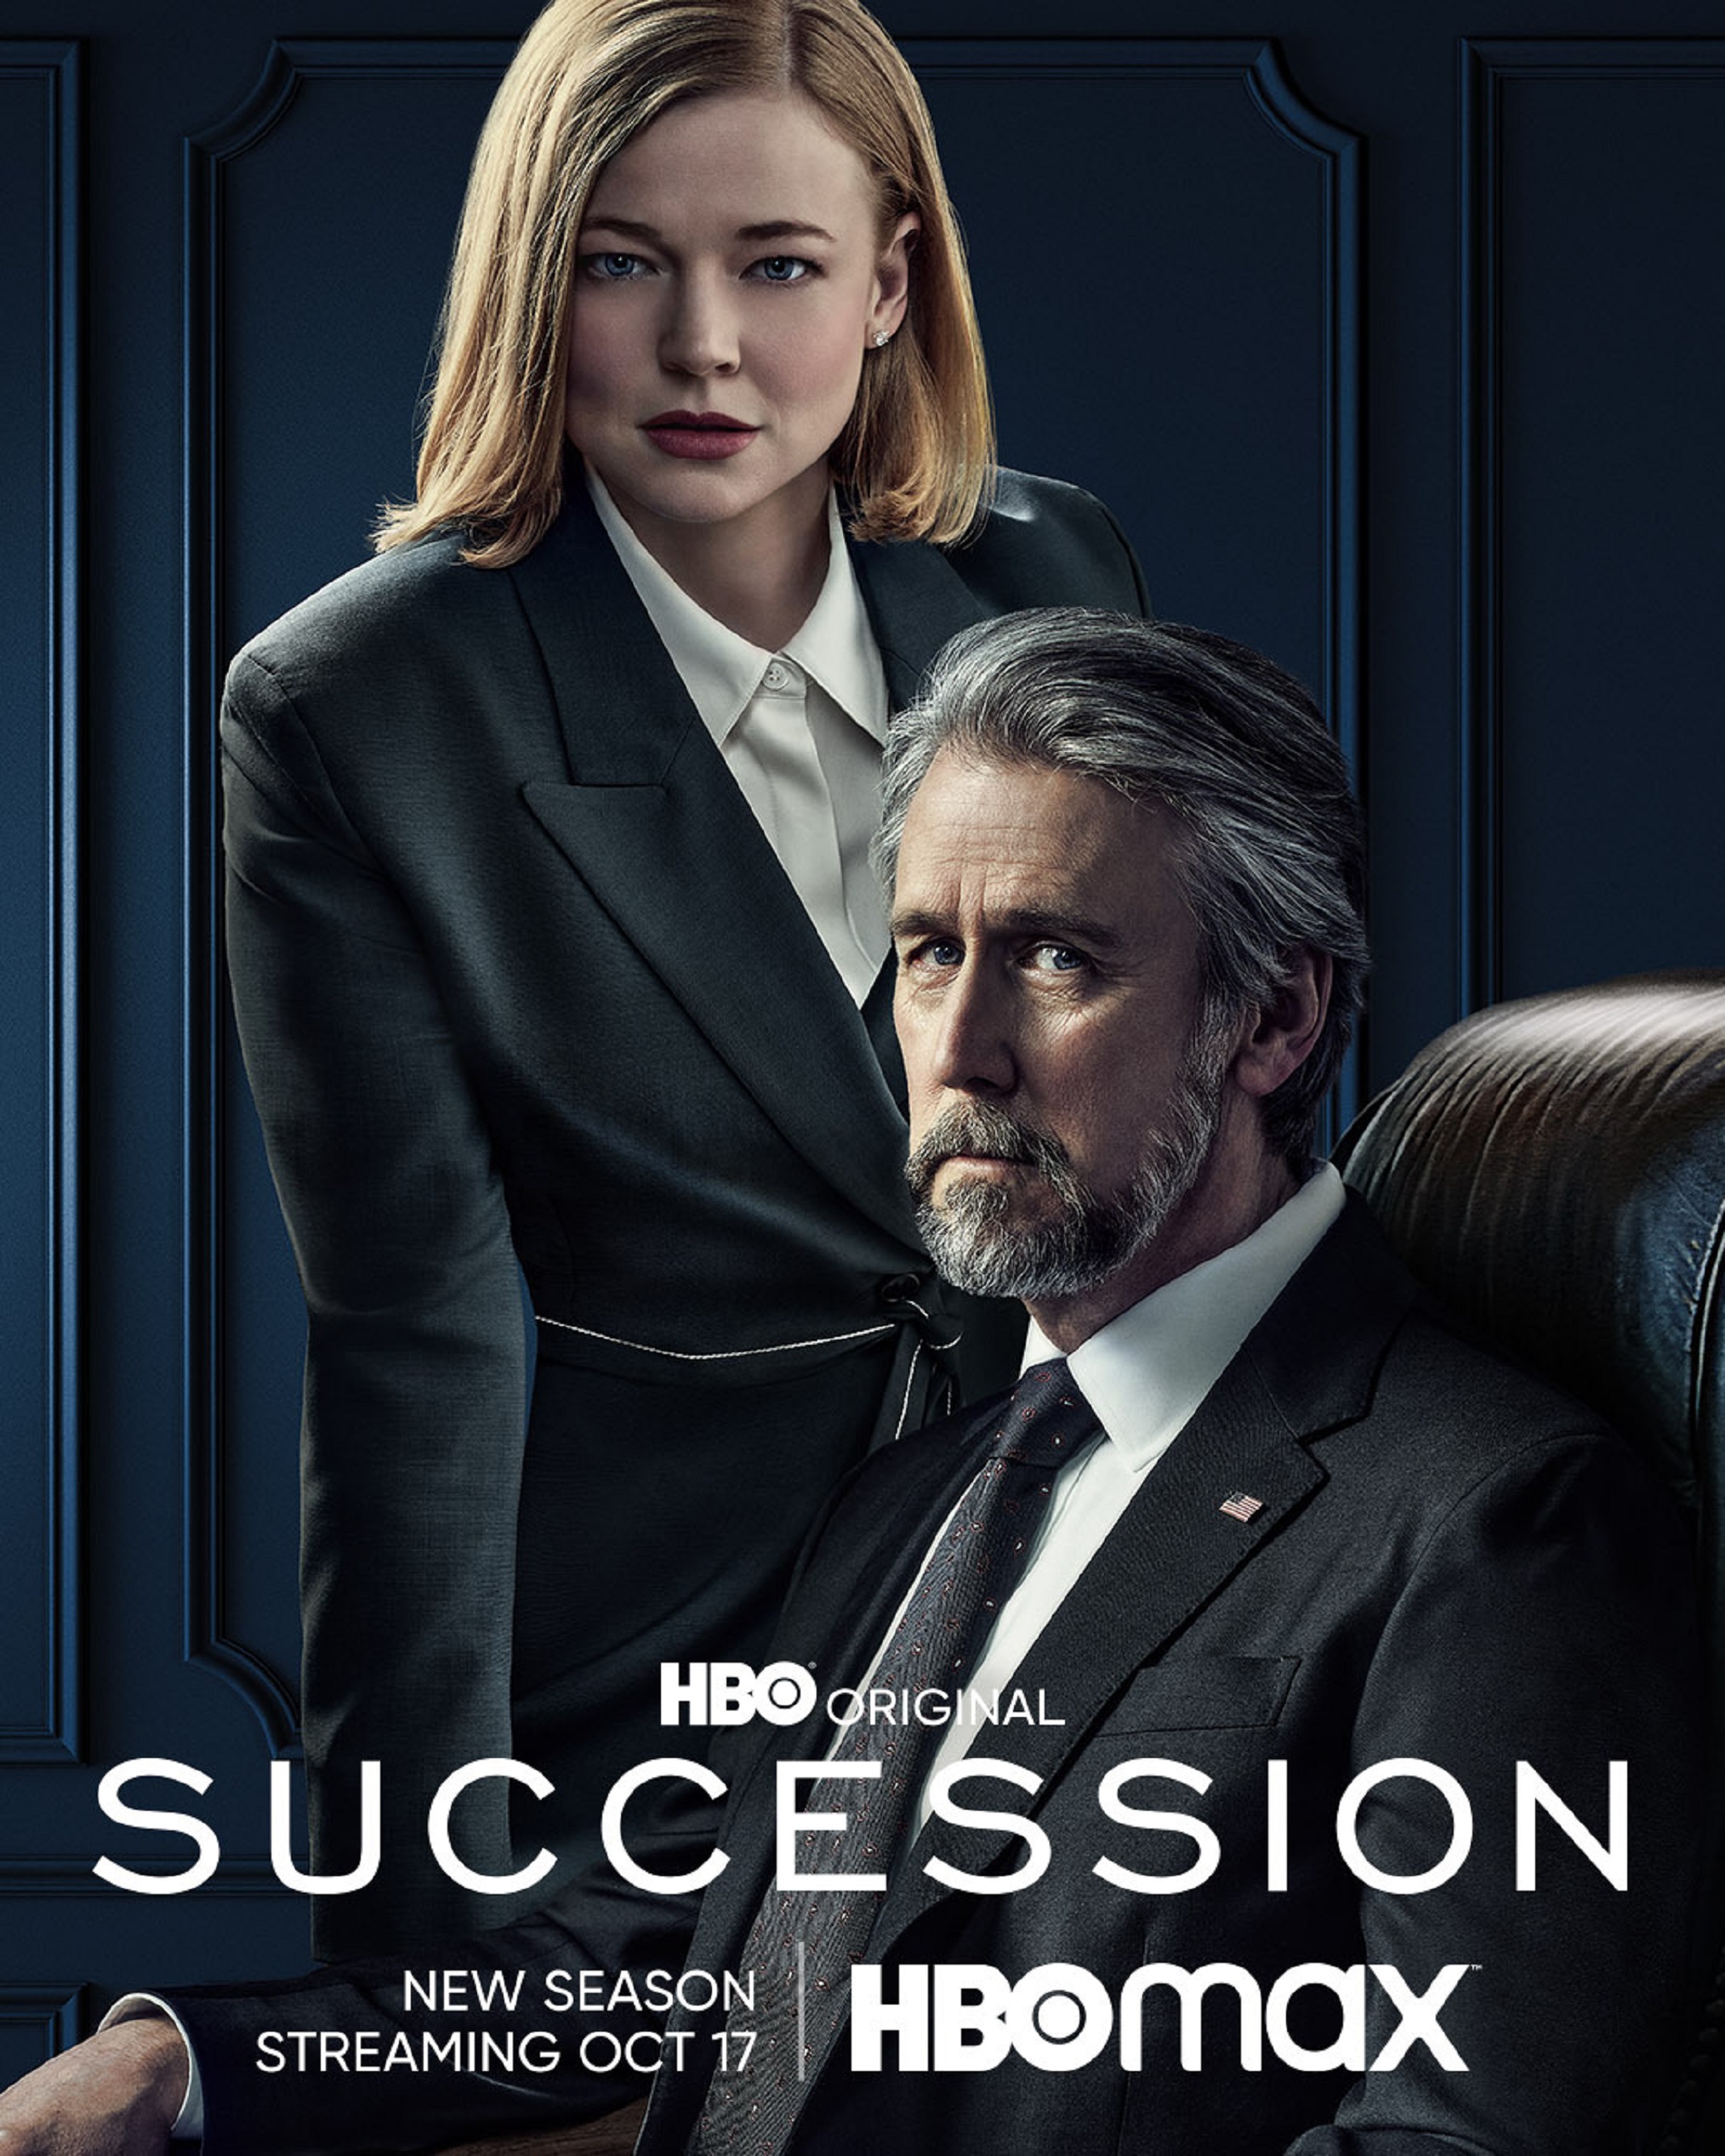 Succession Season 3 Sarah Snook and Alan Ruck as Shiv and Connor Roy